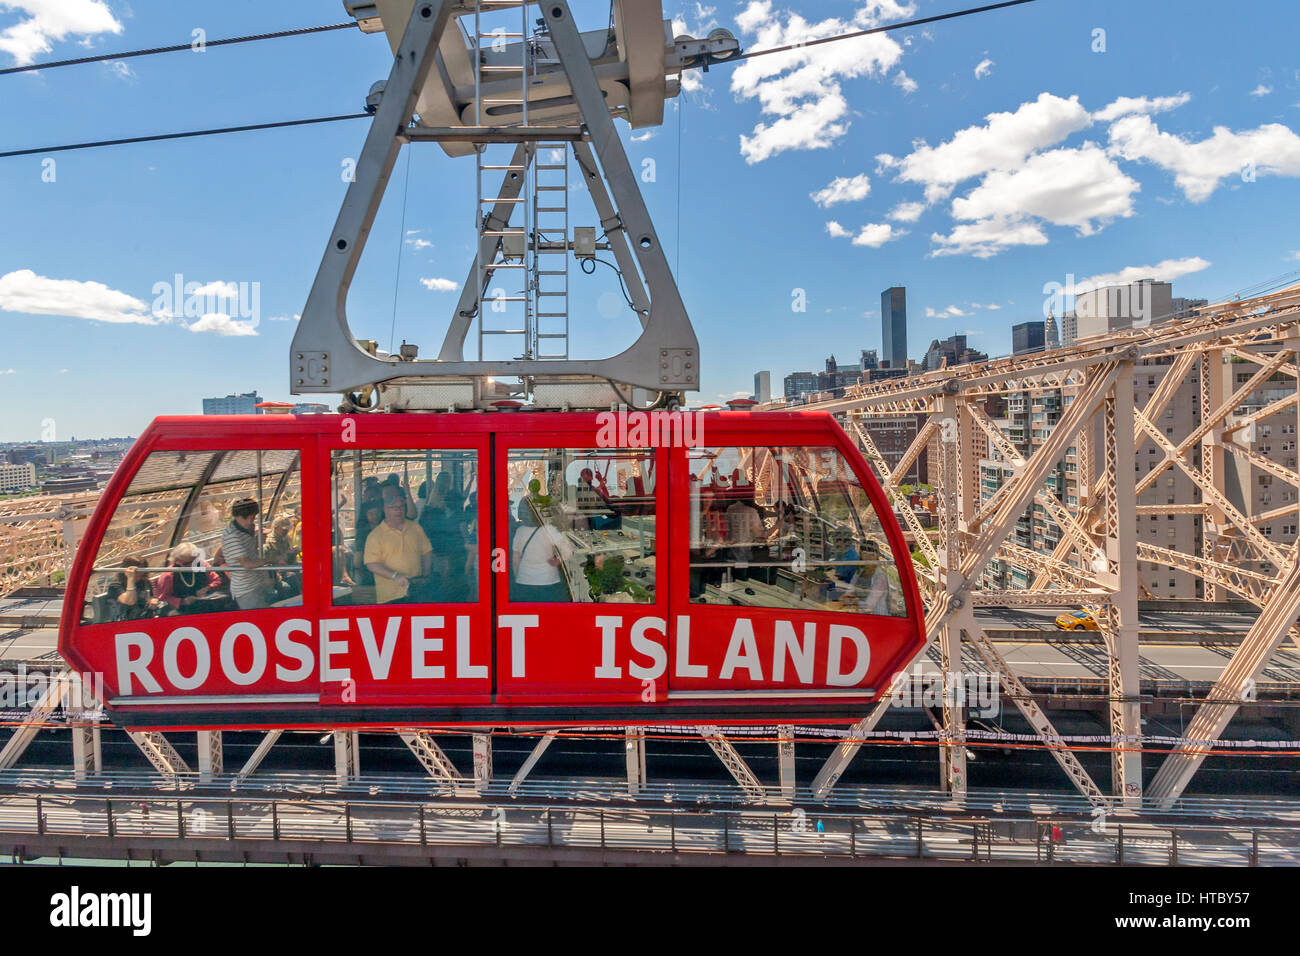 A view of the 59th Street Bridge and Roosevelt Tram connecting Roosevelt Island to Manhattan, New York City. Stock Photo